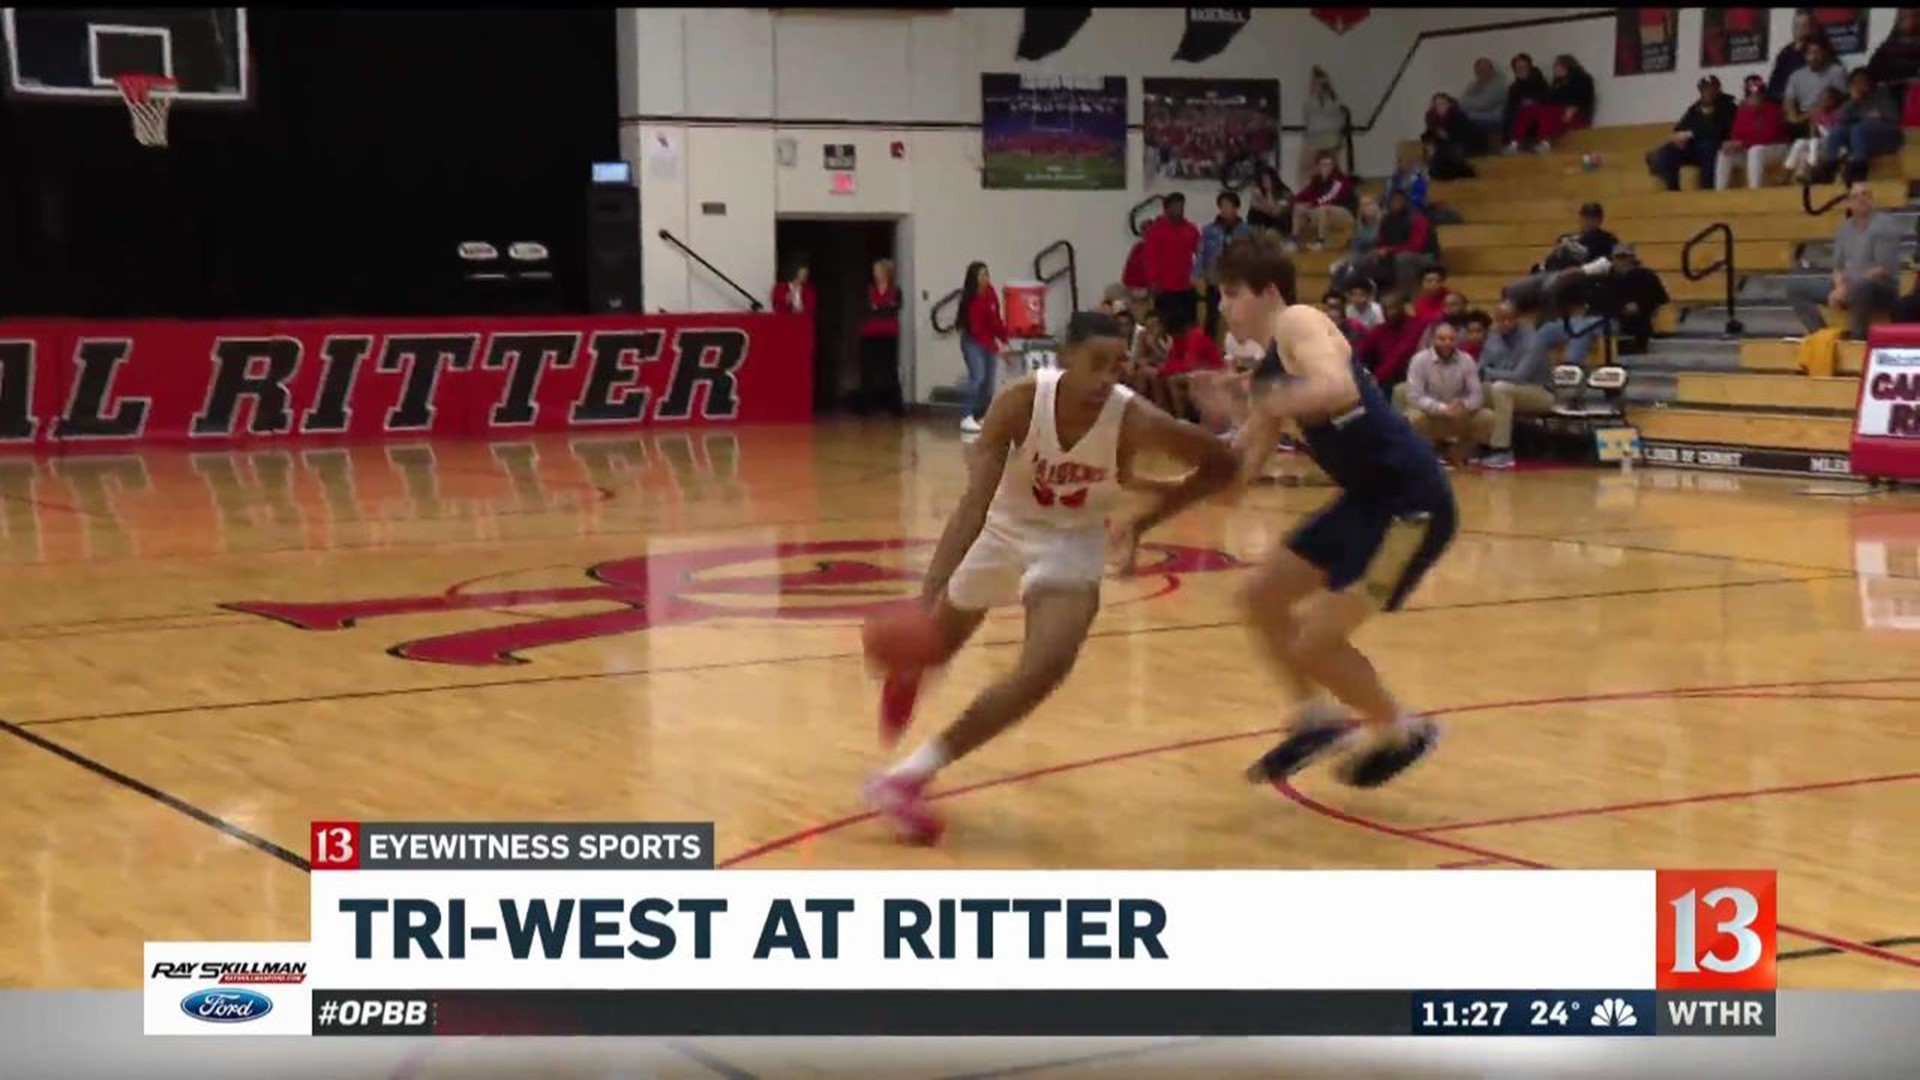 Tri-West at Ritter